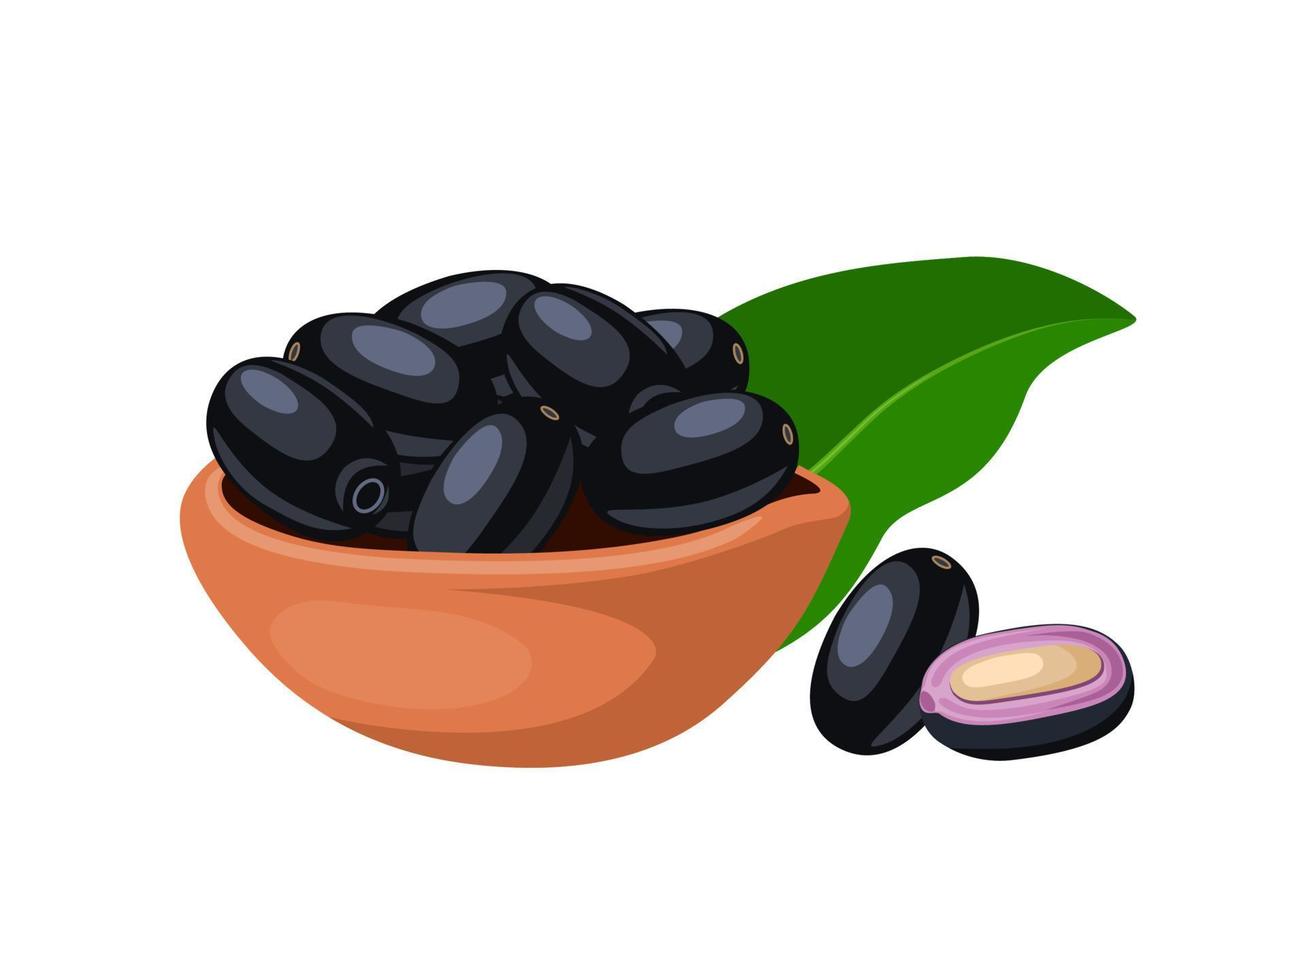 Vector illustration, Jambolan plum or Javanese plum, scientific name Syzygium cumini, isolated on a white background, exotic fruit as a medicinal herb.